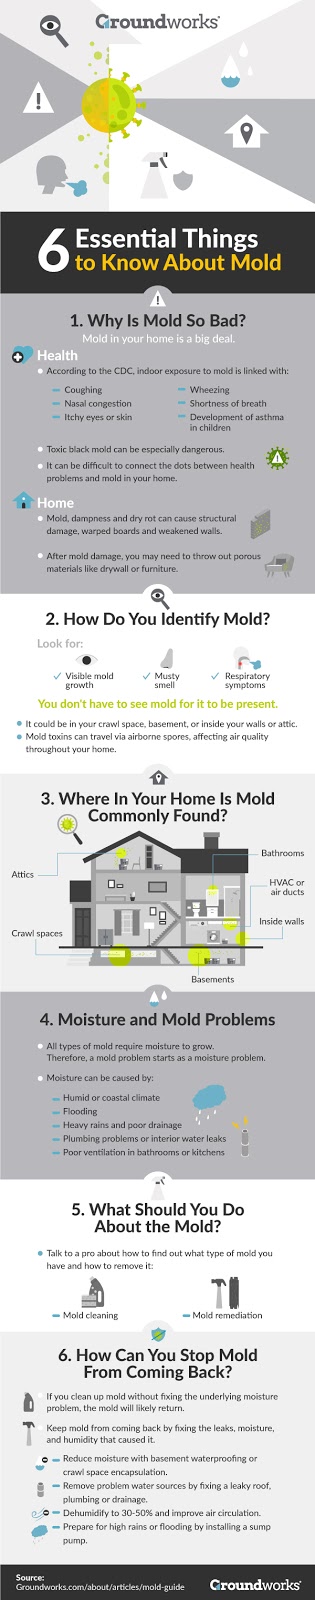 mold guide infographic groundworks Why You Need to Prevent Mold at Your Home - 2